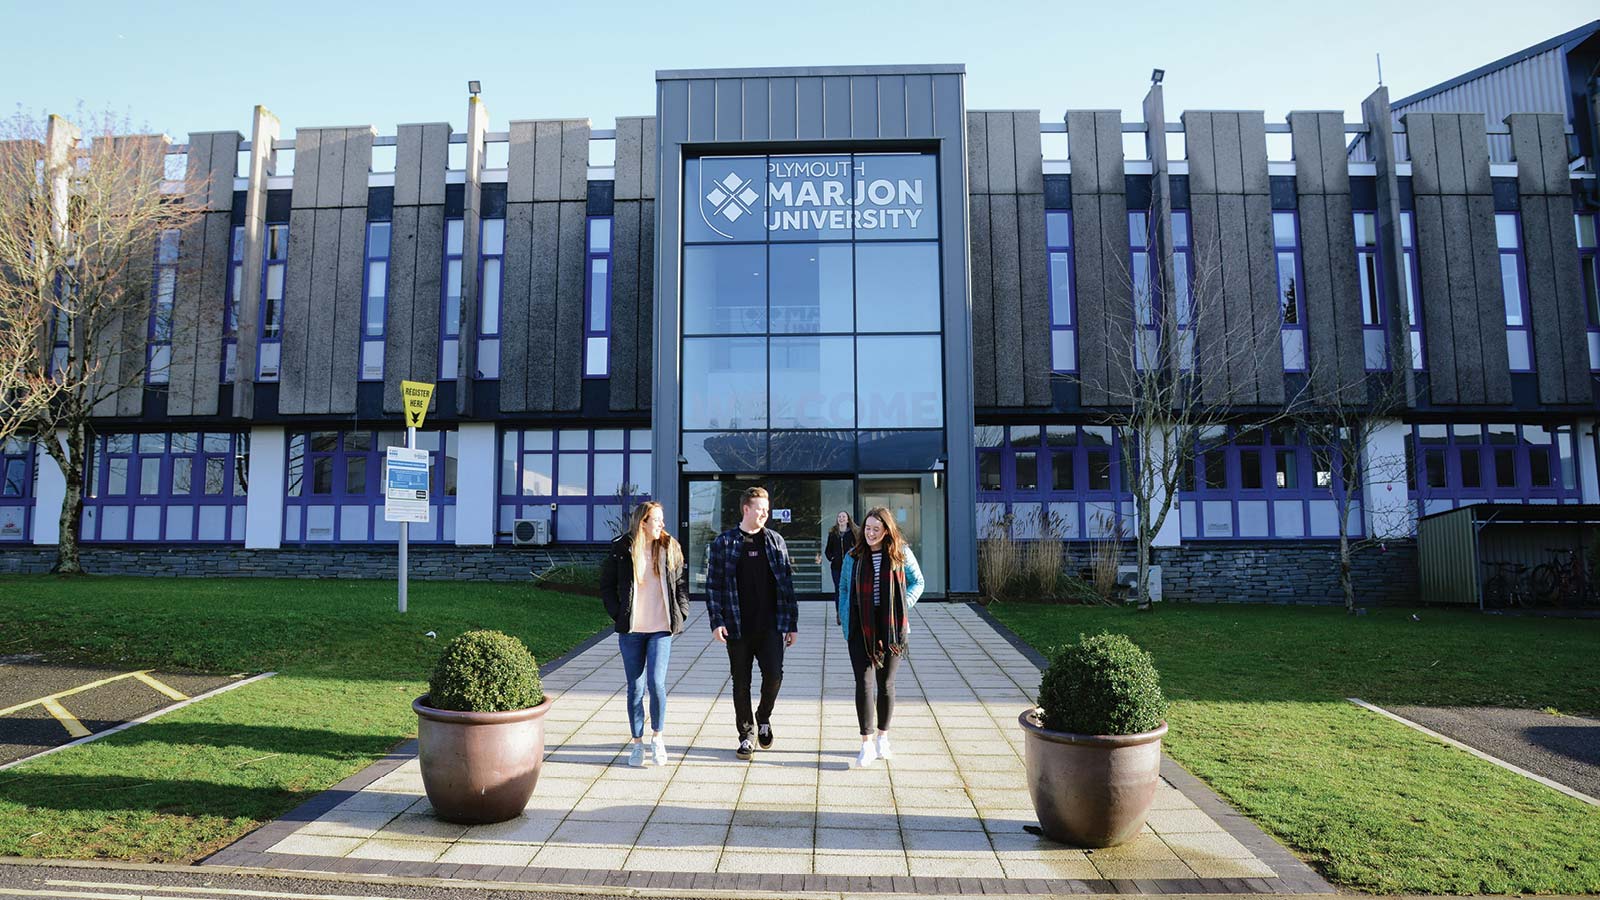 Three students walk out of the West Entrance on the Marjon campus